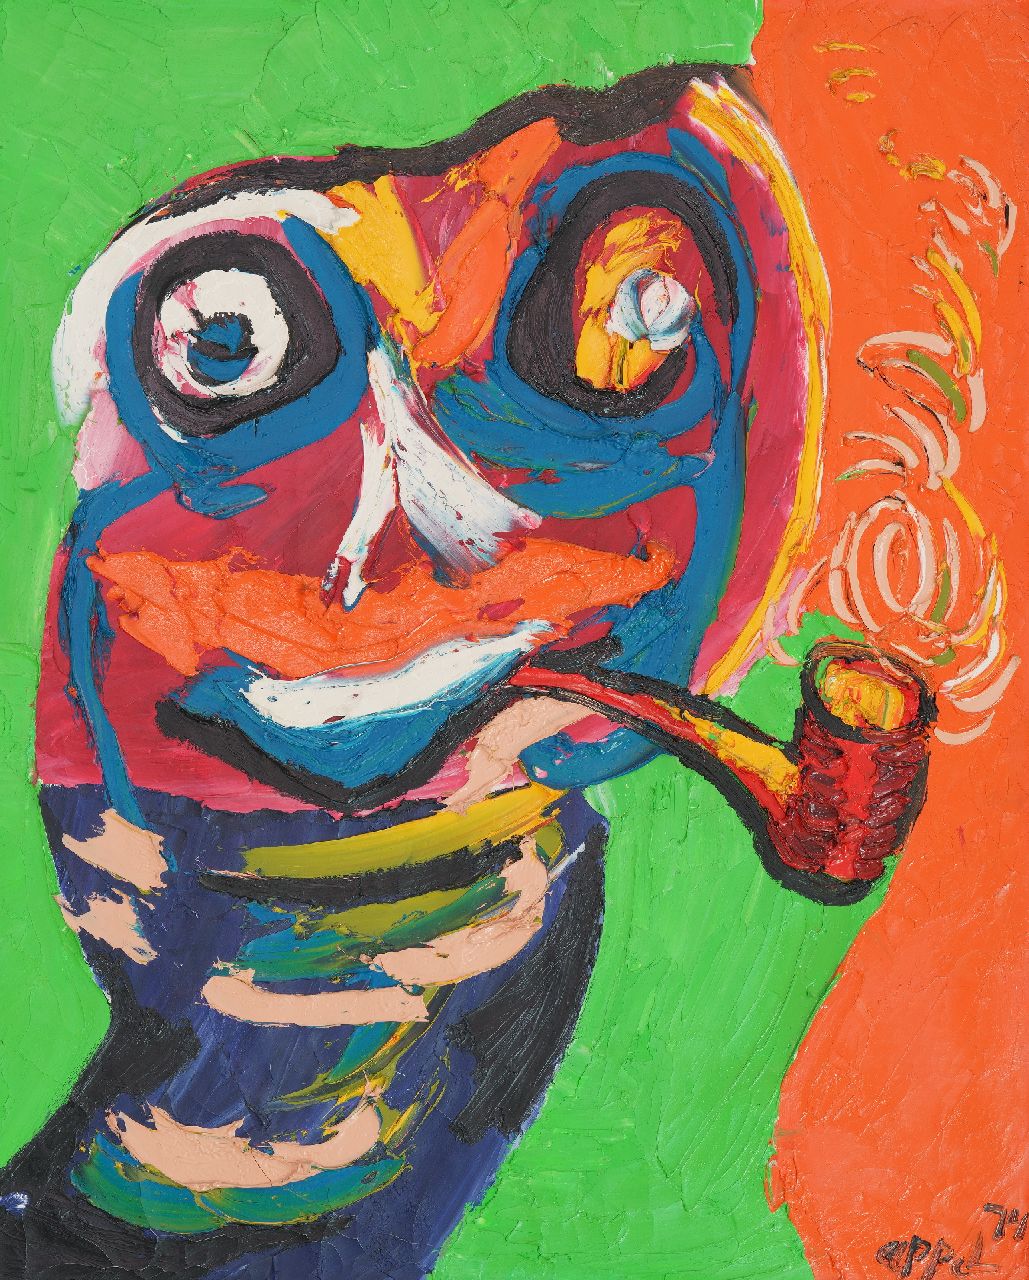 Appel C.K.  | Christiaan 'Karel' Appel | Paintings offered for sale | Femme à la pipe (ode to Van Gogh with a pipe), oil on canvas 100.2 x 80.8 cm, signed l.r. and dated '74